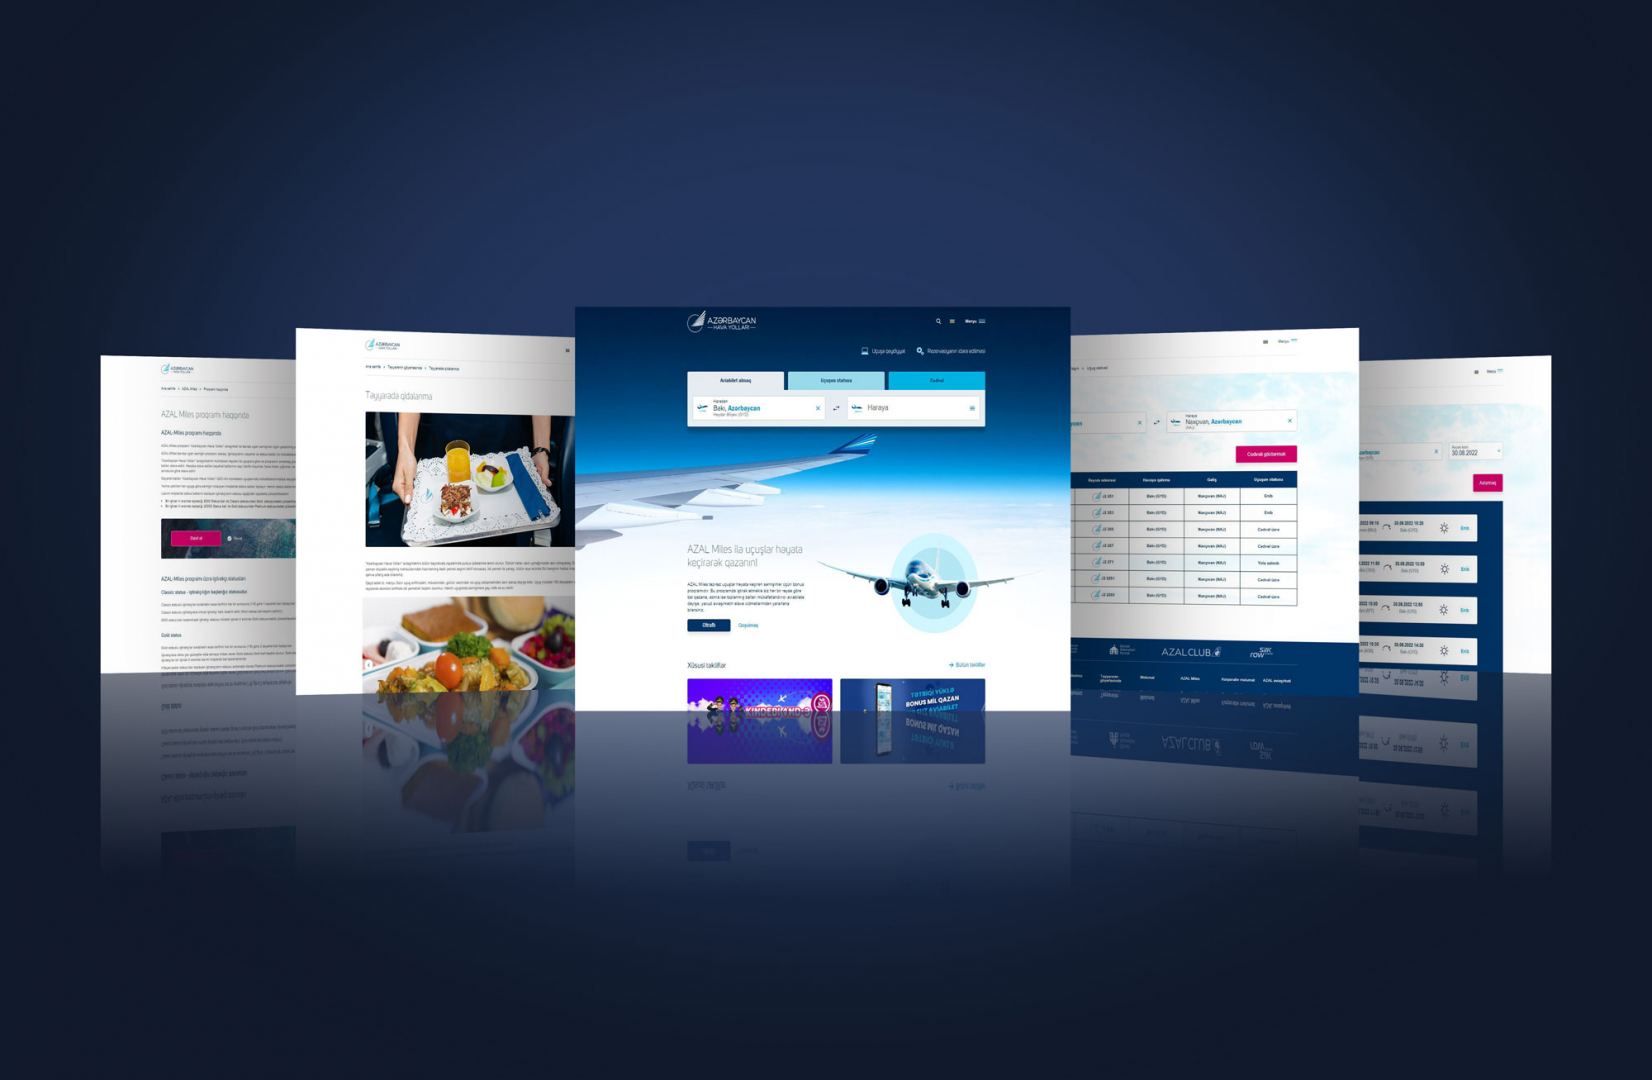 AZAL presented an updated version of its official website